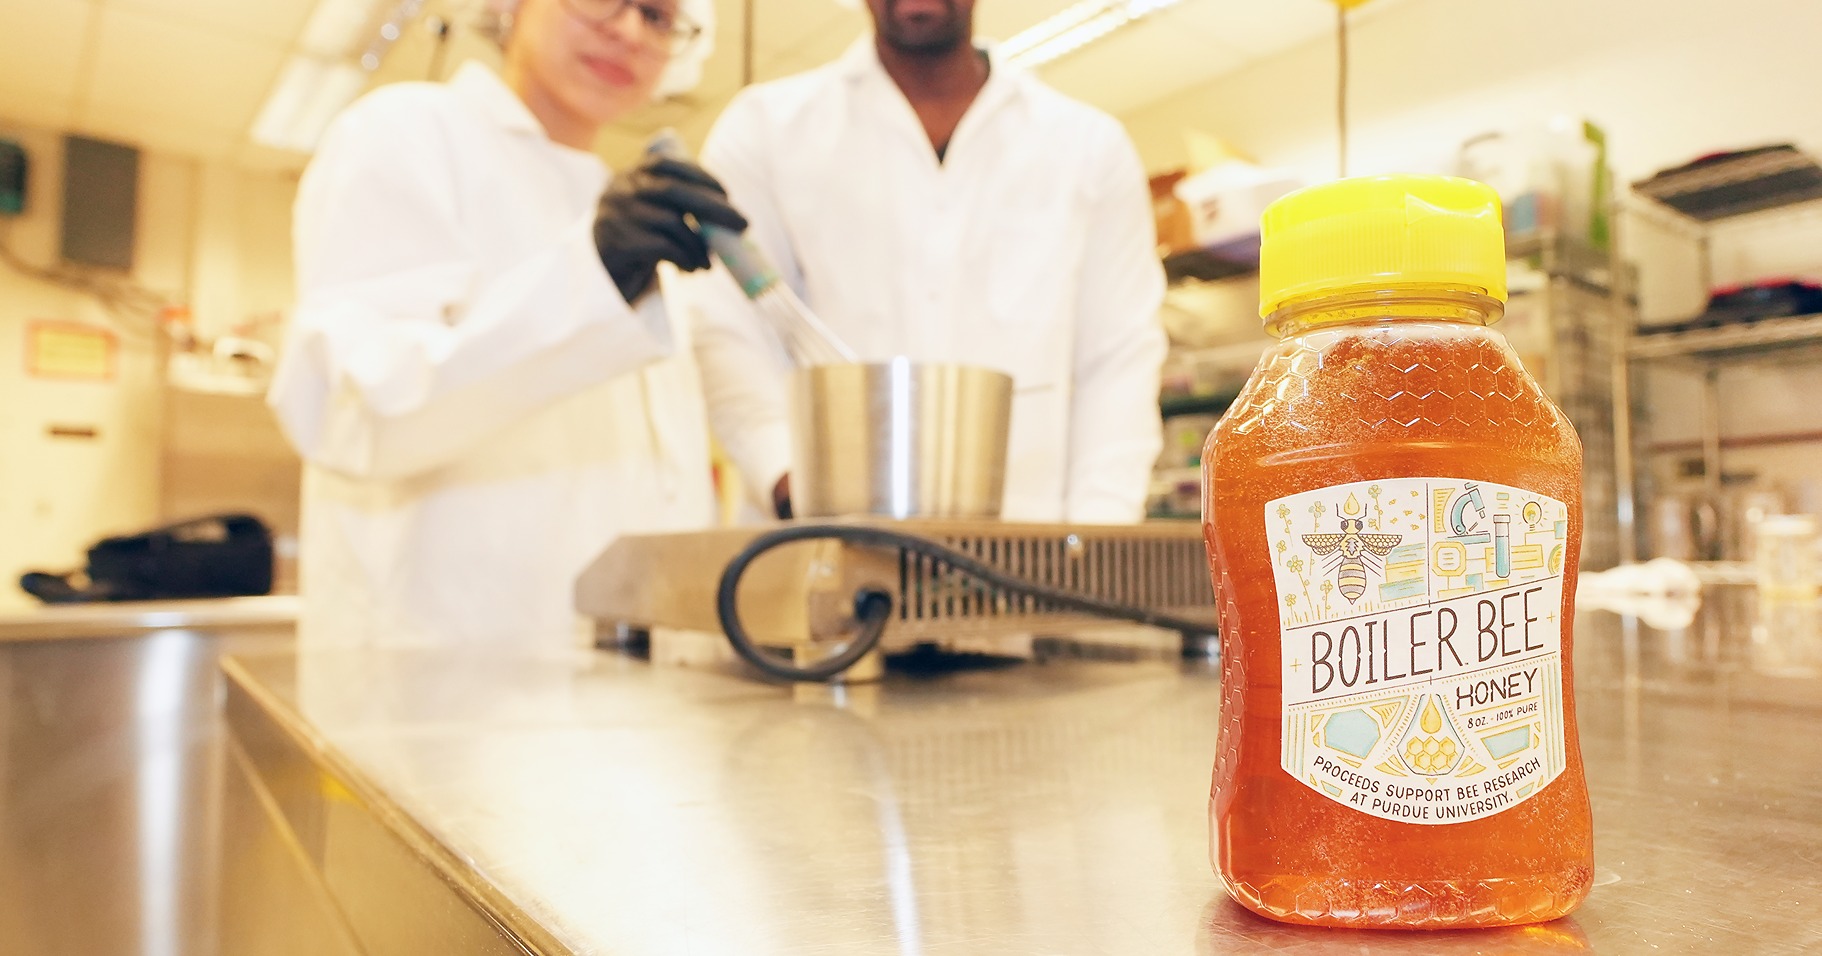 A bottle of Boiler Bee Honey sits on the edge of chrome table in Skidmore lab with two students cooking in labcoats and hairnets in the background.